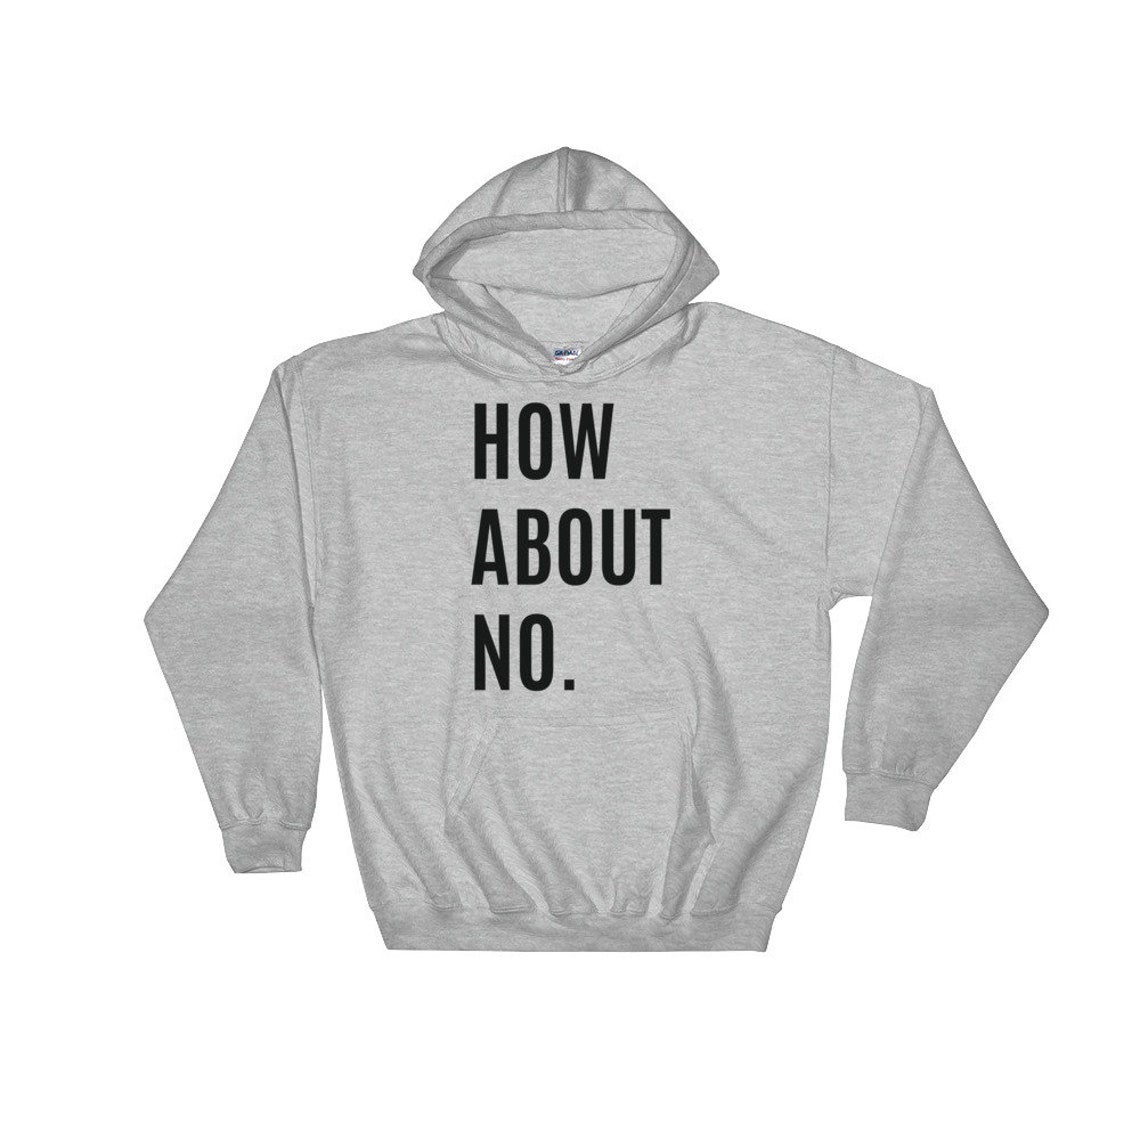 How About No Unisex Hooded Sweatshirt - Etsy